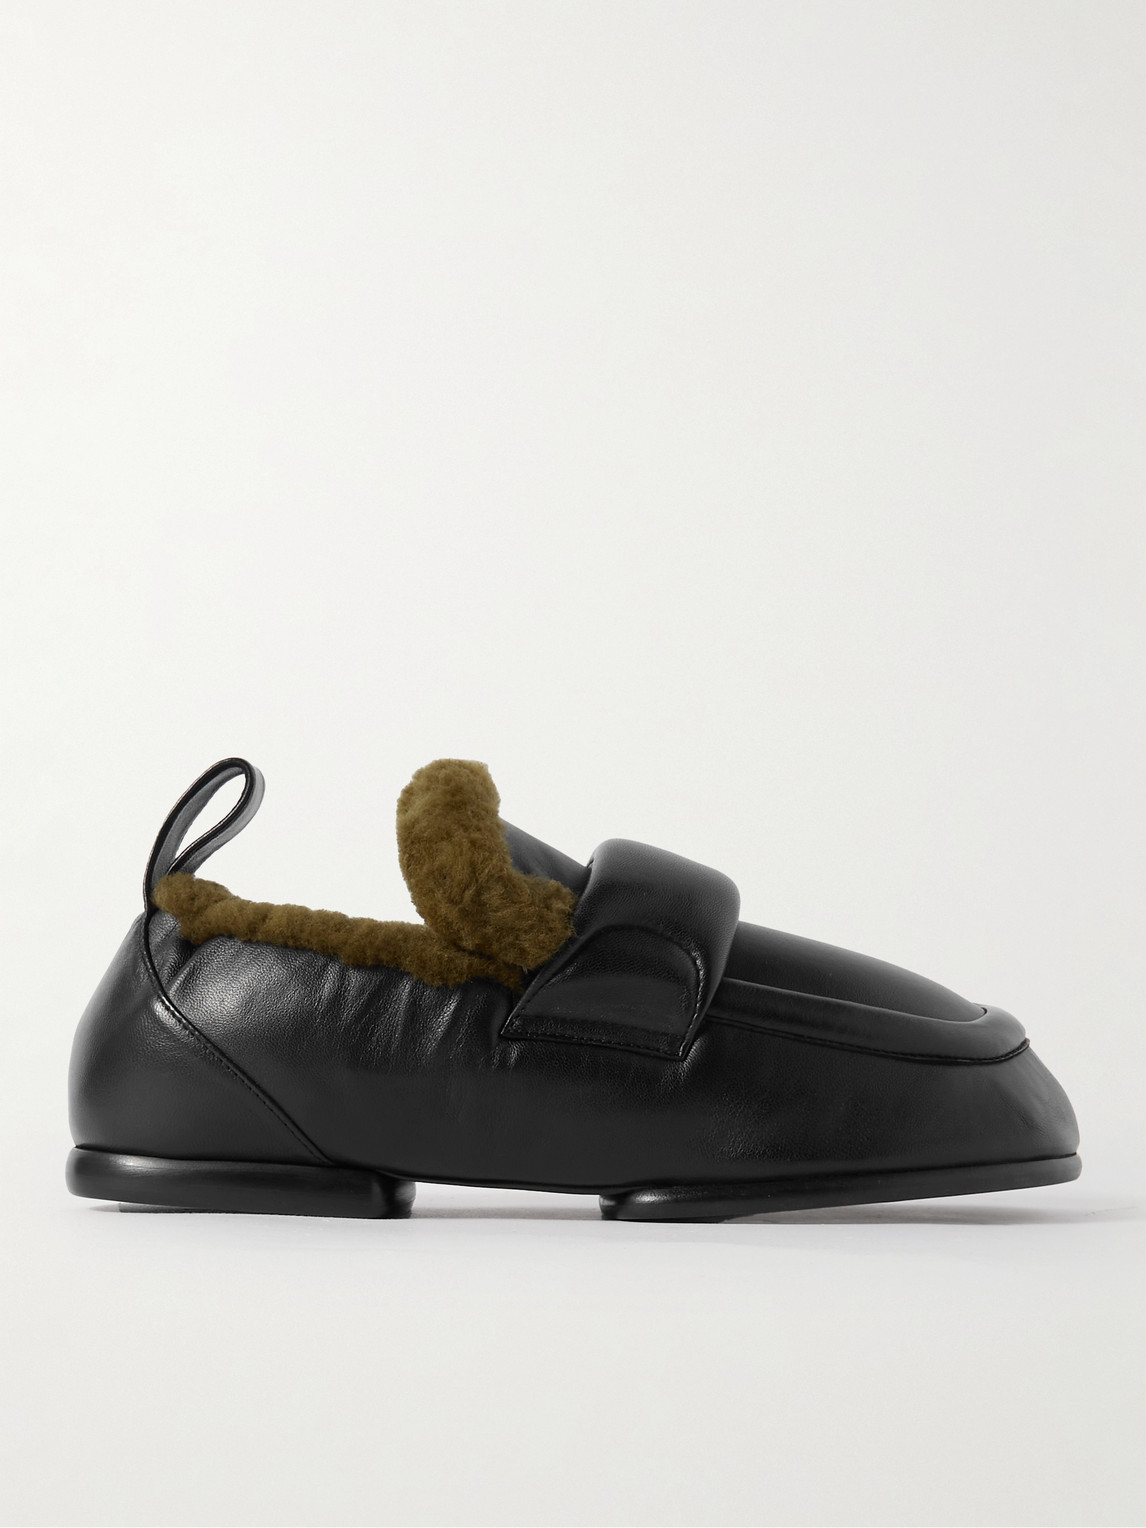 Dries Van Noten Shearling-lined Leather Loafers In Black